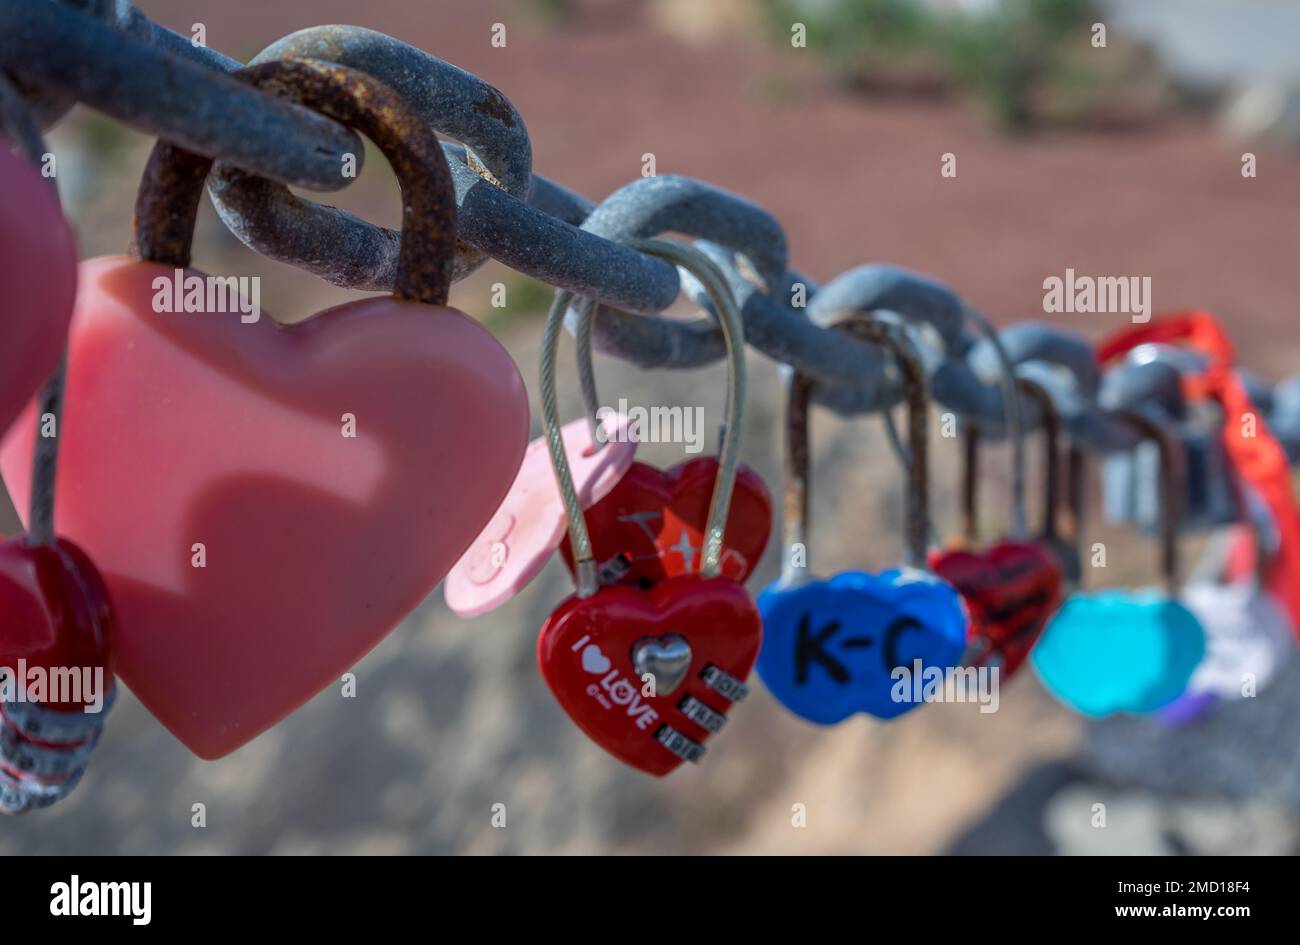 Love locks on a metal chain placed by lovers to declare their love. Found in Playa Flamingo in Lanzarote Stock Photo